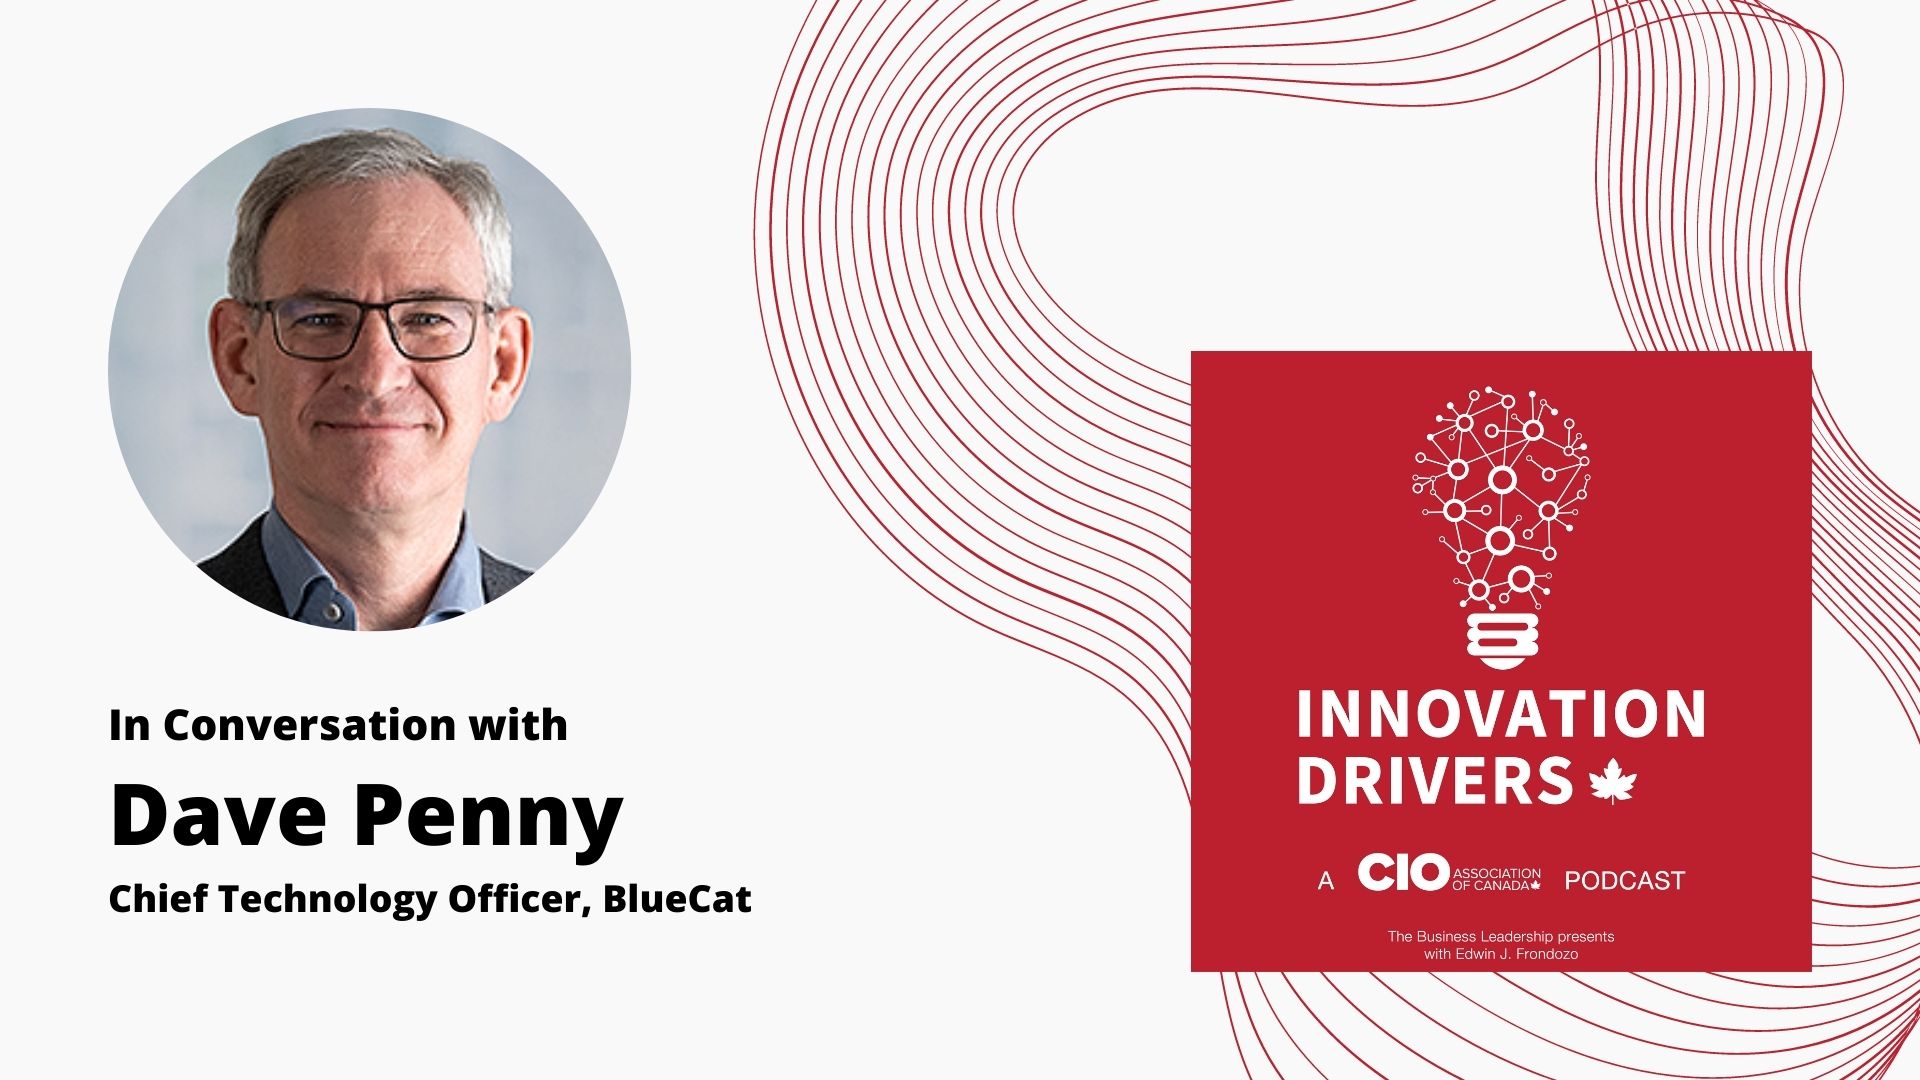 IDP006 | Innovation Drivers with David Penny